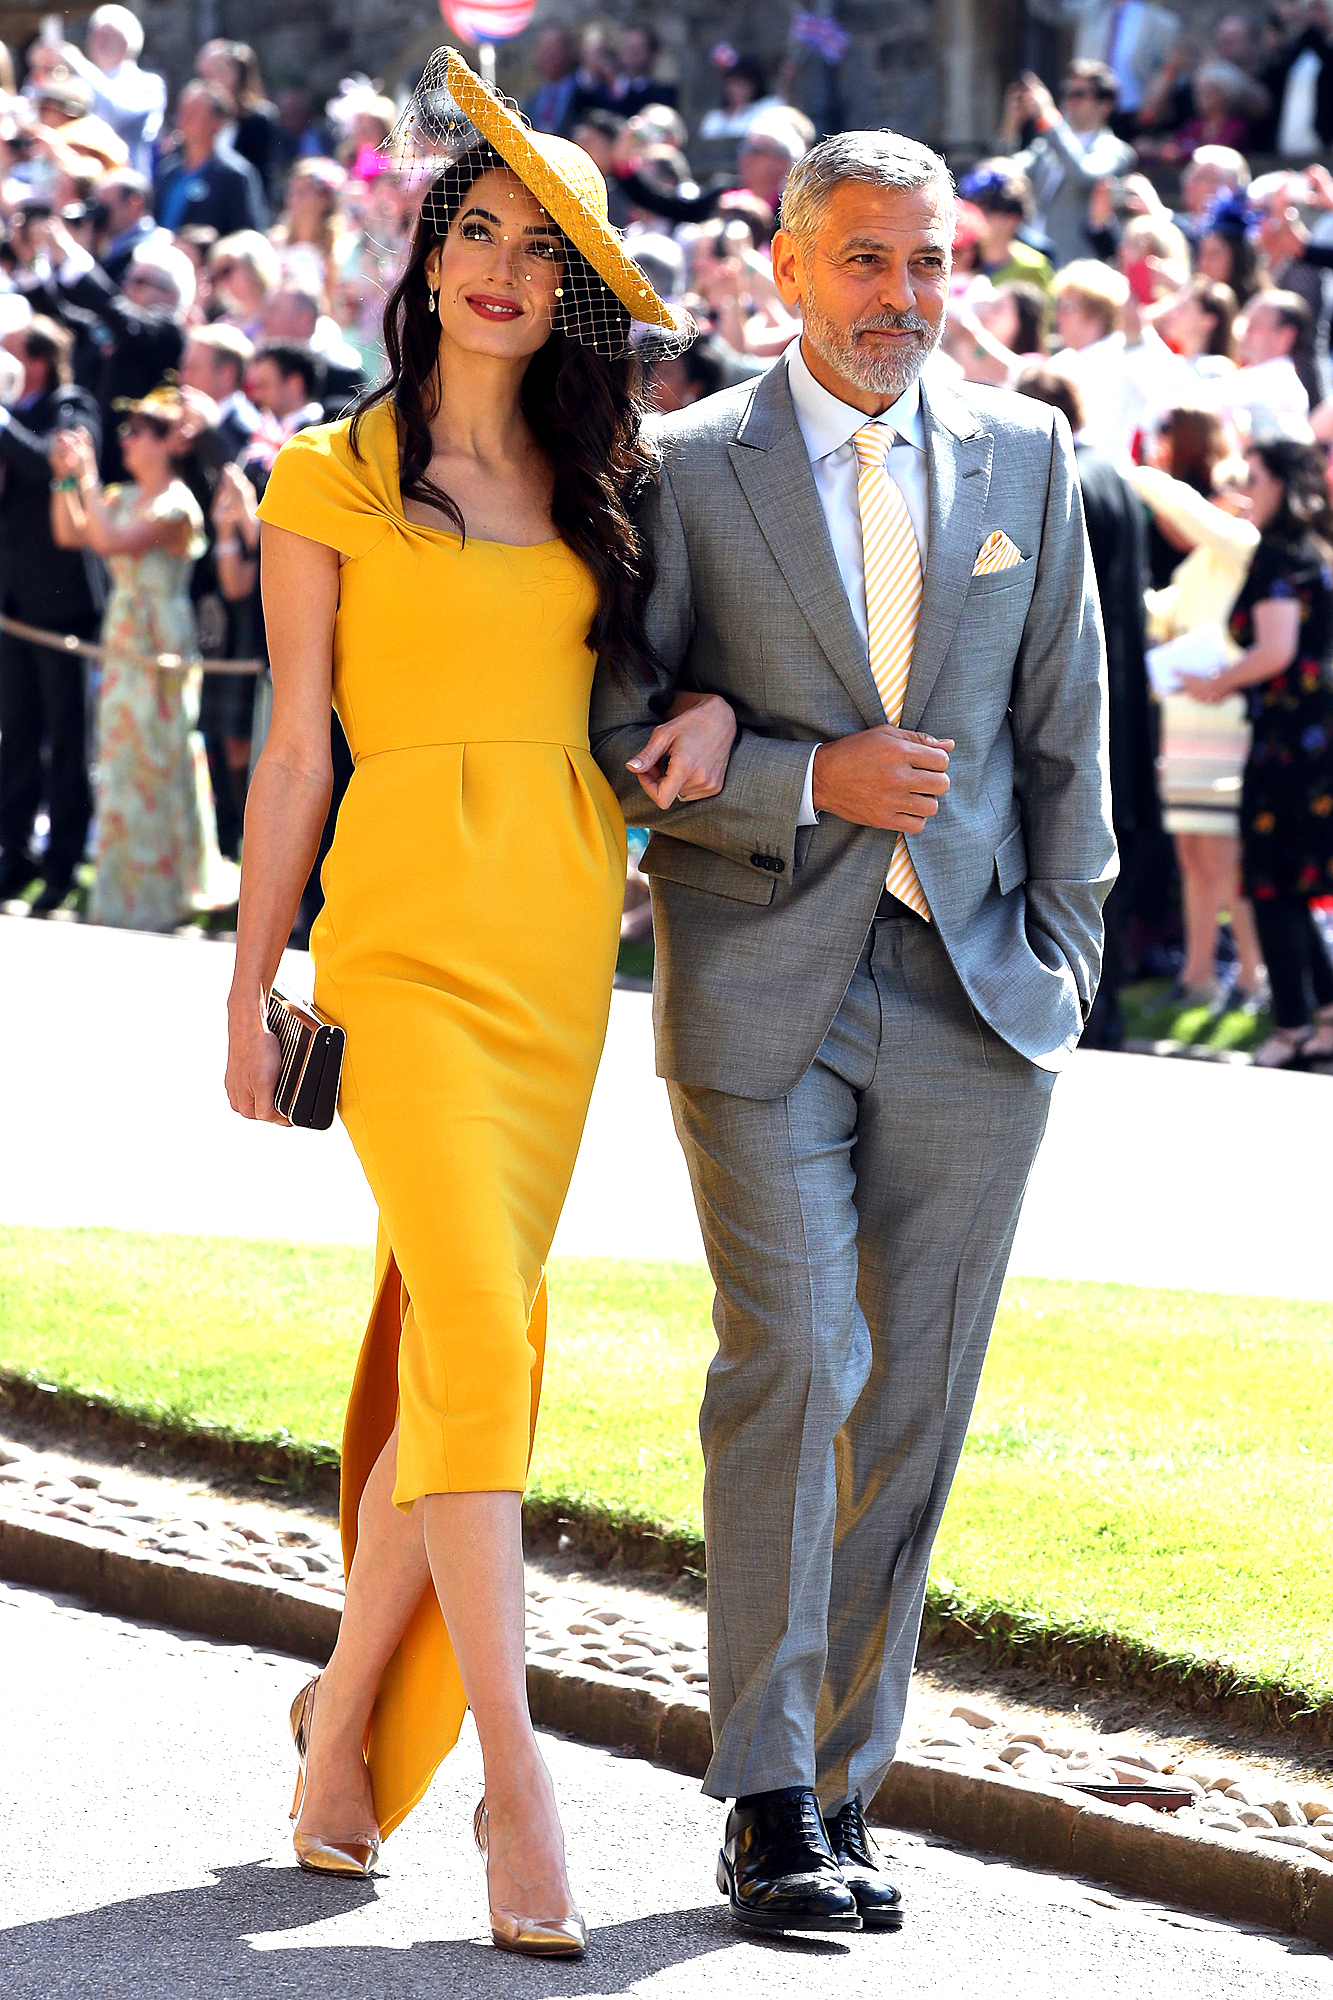 Amal Clooney at Prince Harry and Meghan Markle's Royal Wedding Wearing a Gorgeous Mustard Dress.